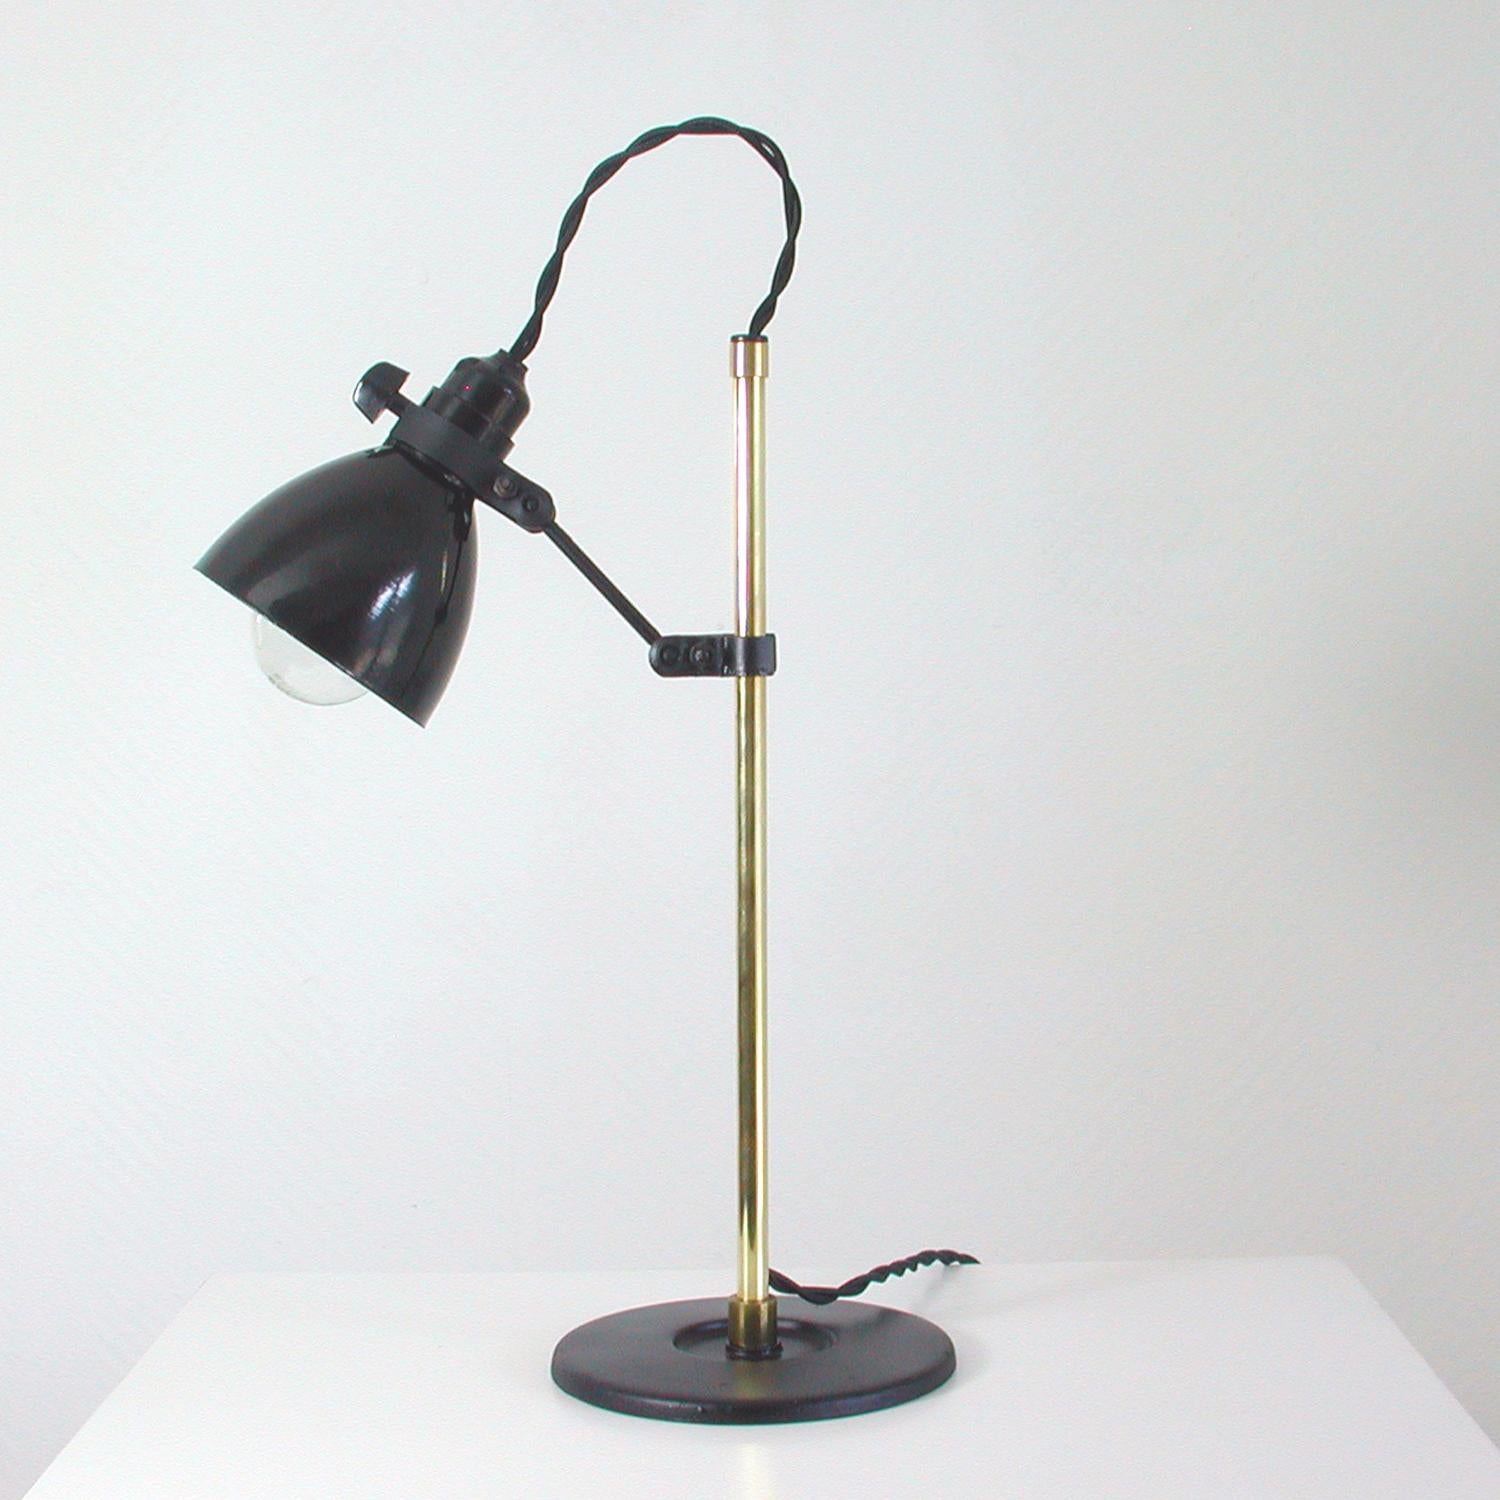 This vintage table lamp was designed and manufactured in Germany in the 1950s. It features a height adjustable bakelite lamp shade, rotatable via multiple joints, a brass lamp arm and black iron base.

The black bakelite shade is shiny and